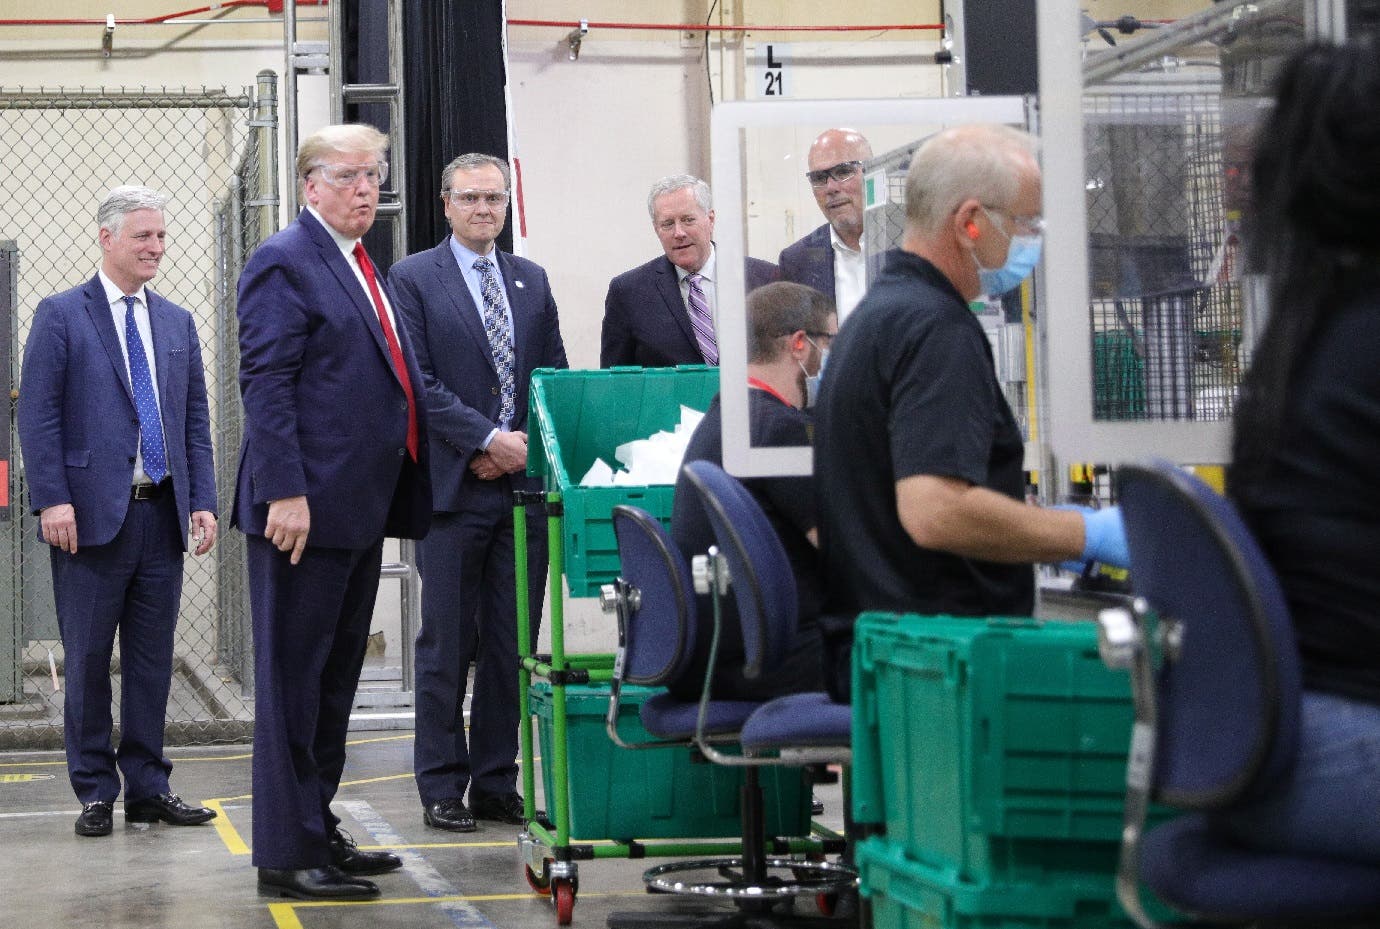 Trump observes an assembly line during a visit to a Honeywell facility making face masks for the coronavirus outbreak in Phoenix, Arizona, US, May 5, 2020. (Reuters)